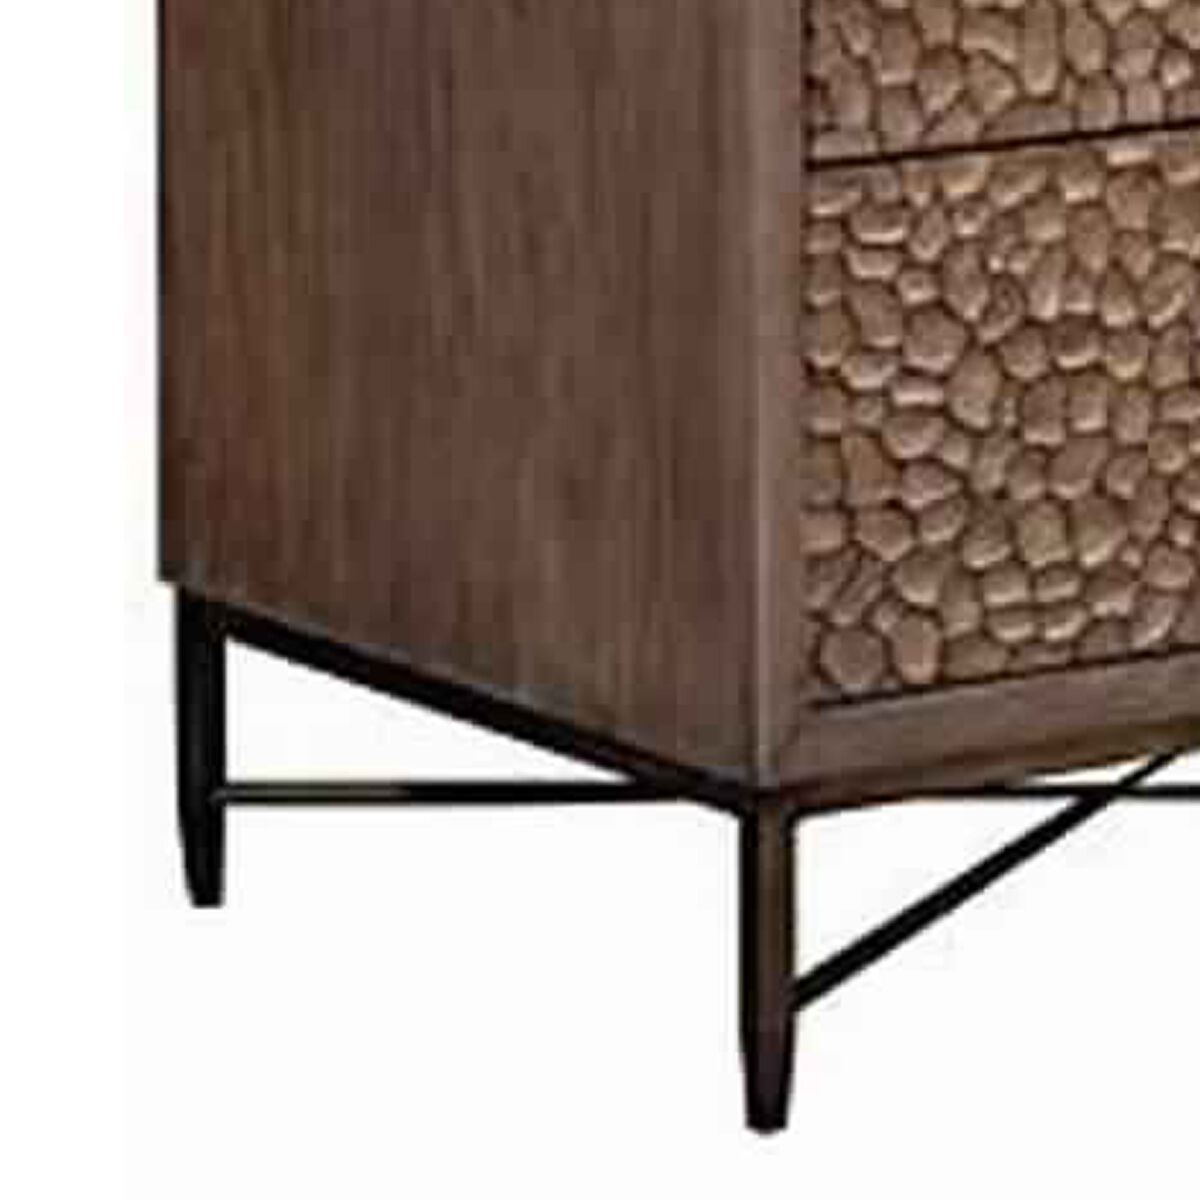 6 Drawer Wooden Dresser with Polyresin Textured Front, Brown